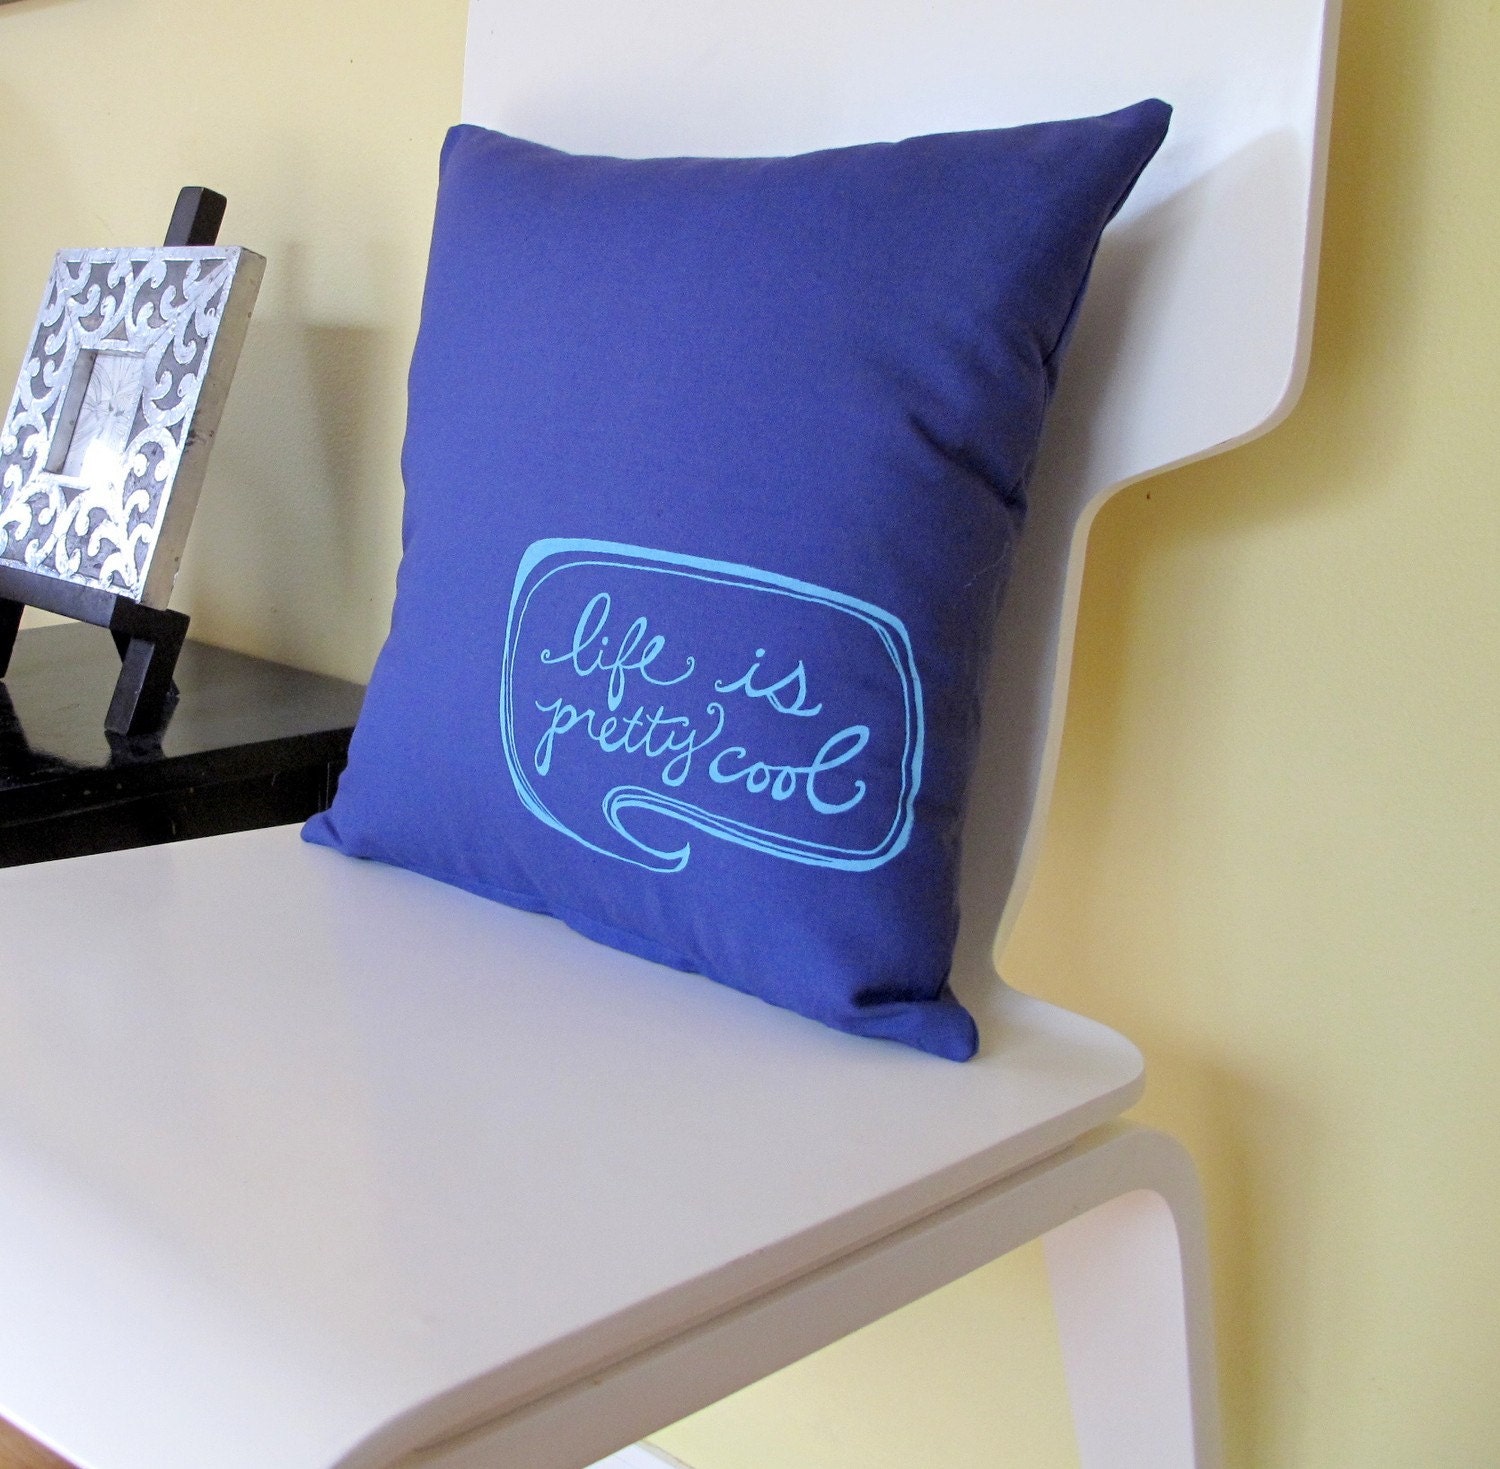 Pillow Cover - Life is Pretty Cool on Navy Blue Kona Cotton - 16 x 16 inches